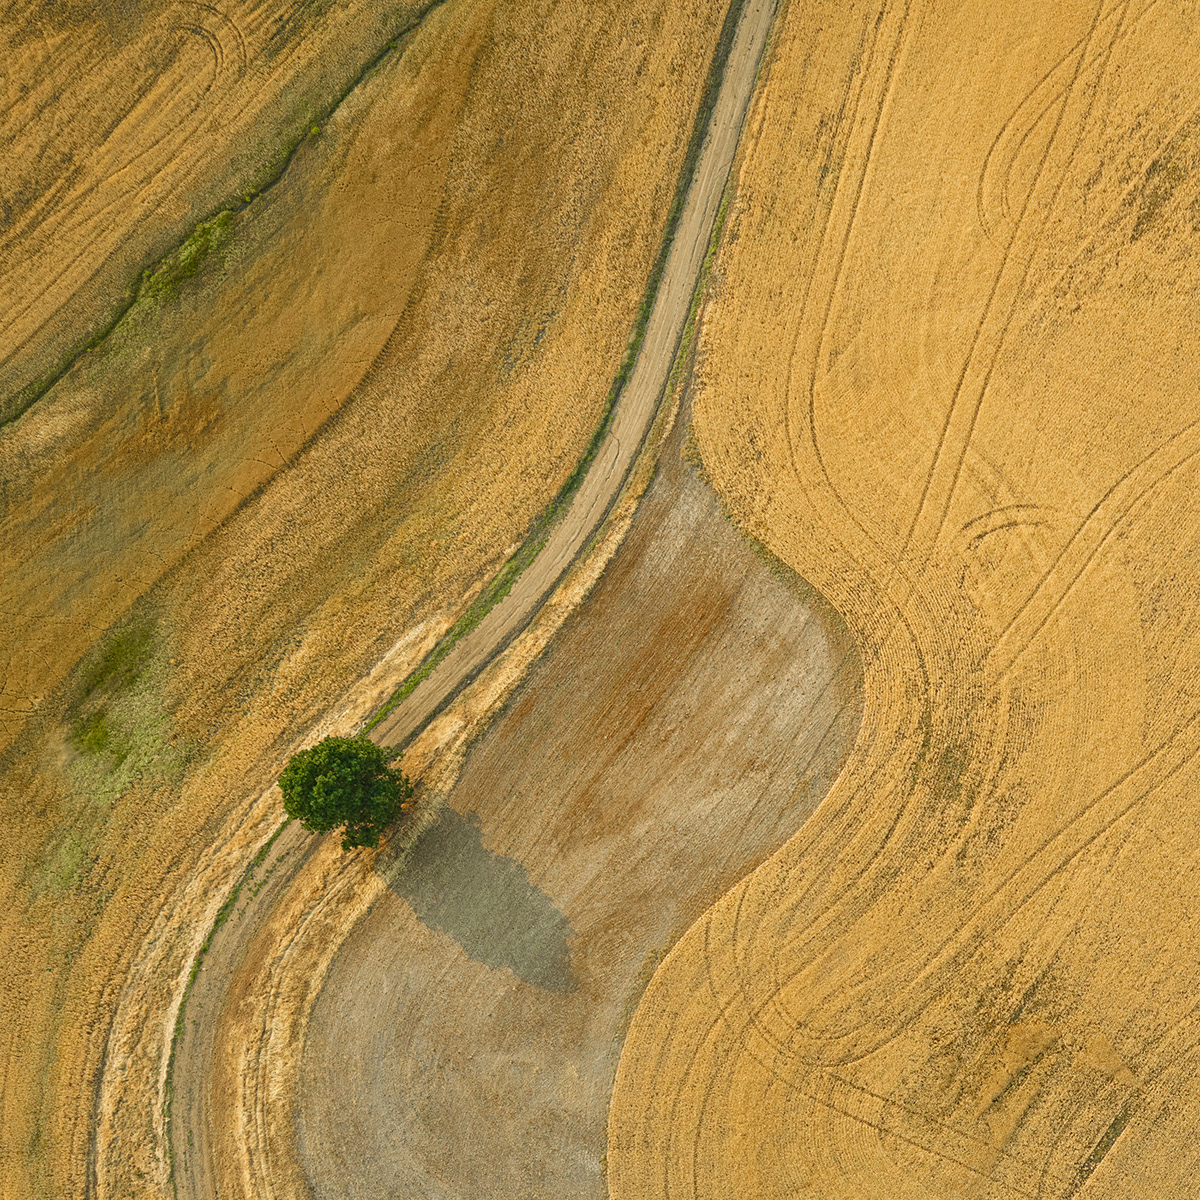 AERIAL FINE ART ABSTRACT CORPORATE AERIAL ART Eastern Washington FARMING ARTWORK FARMLAND AGRICULTURE HARVEST WHEAT IMAGES PALOUSE AERIAL IMAGES phase one aerial ROLLING HILLS PRODUCE WASHINGTON STATE AERIAL